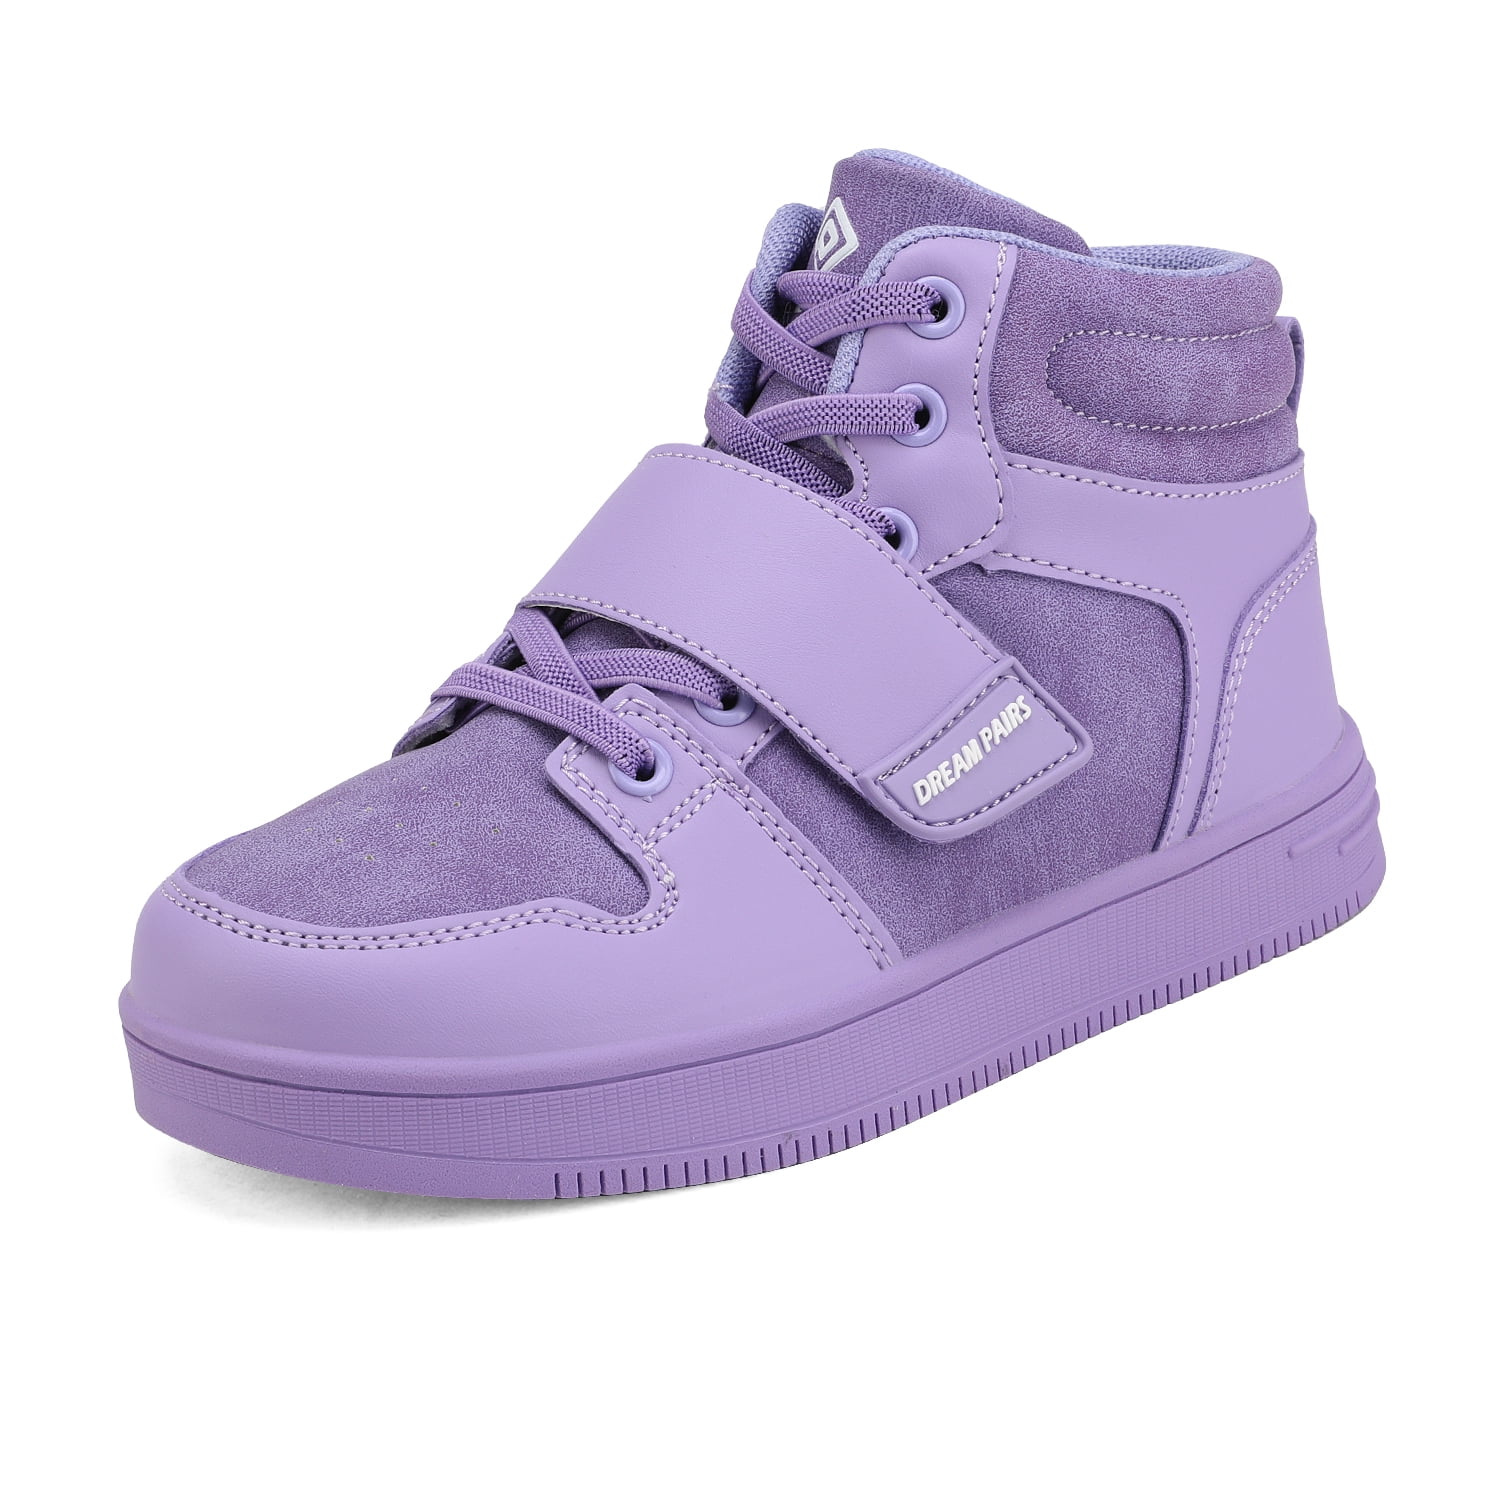 DREAM PAIRS Boys Girls High Top Sneakers Shoes